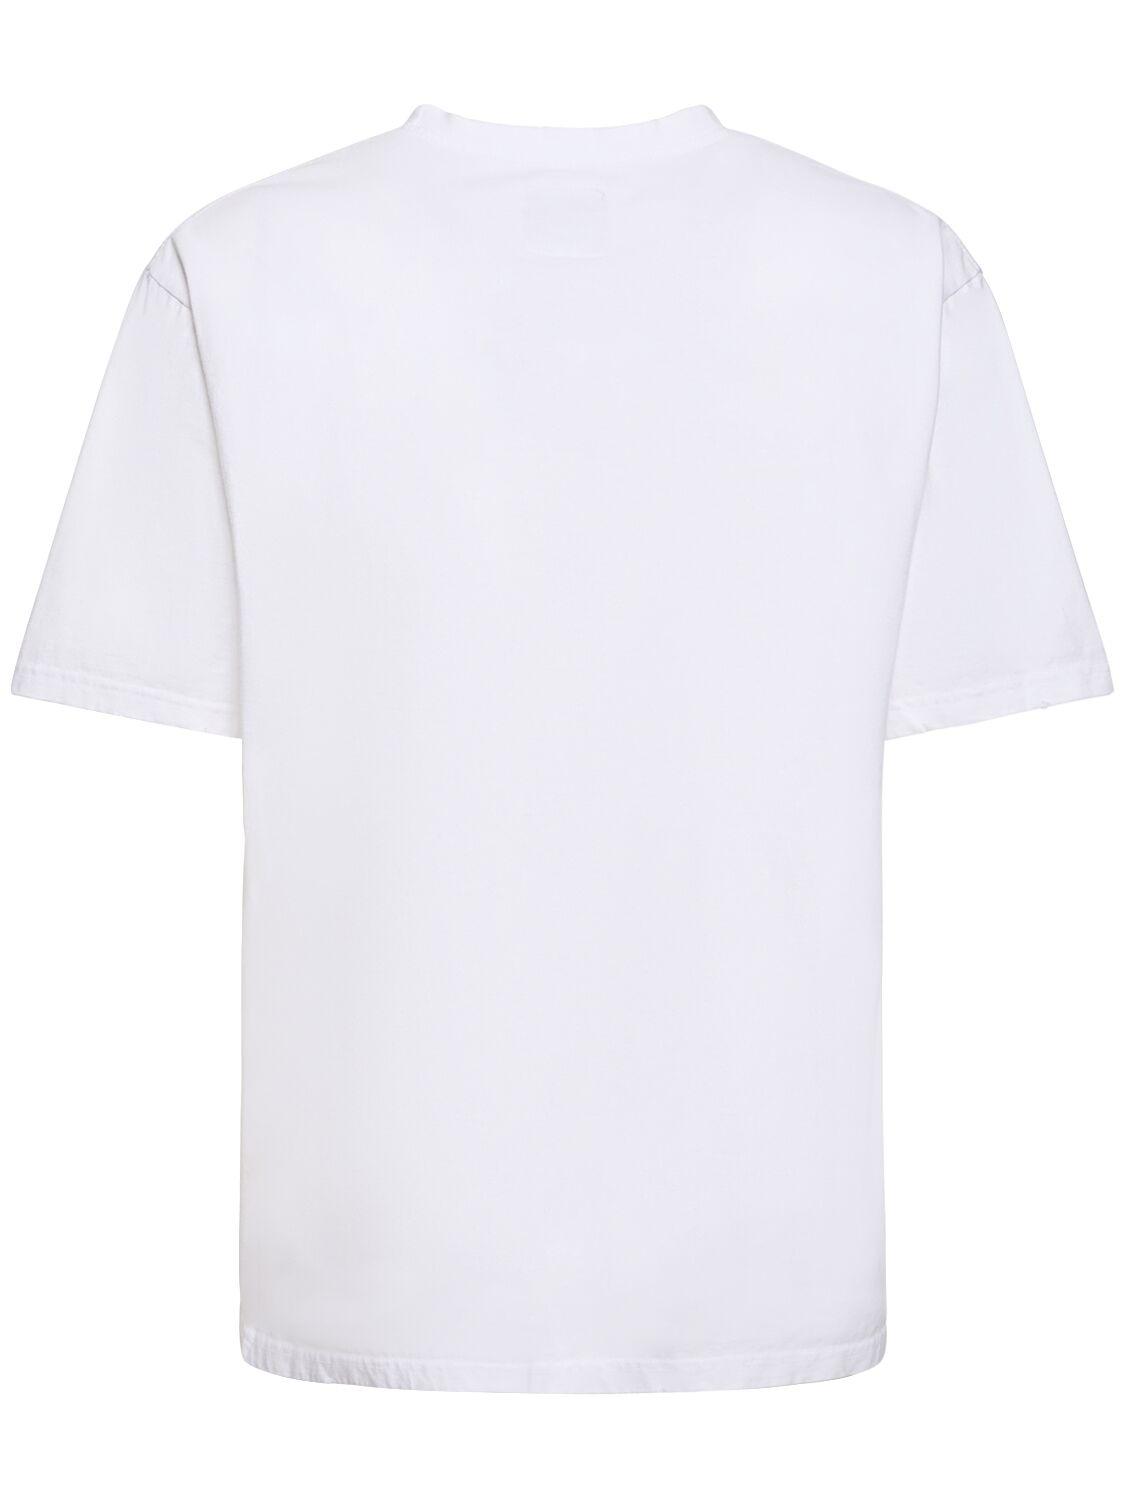 Shop Someit Cotton Distressed Vintage T-shirt In White